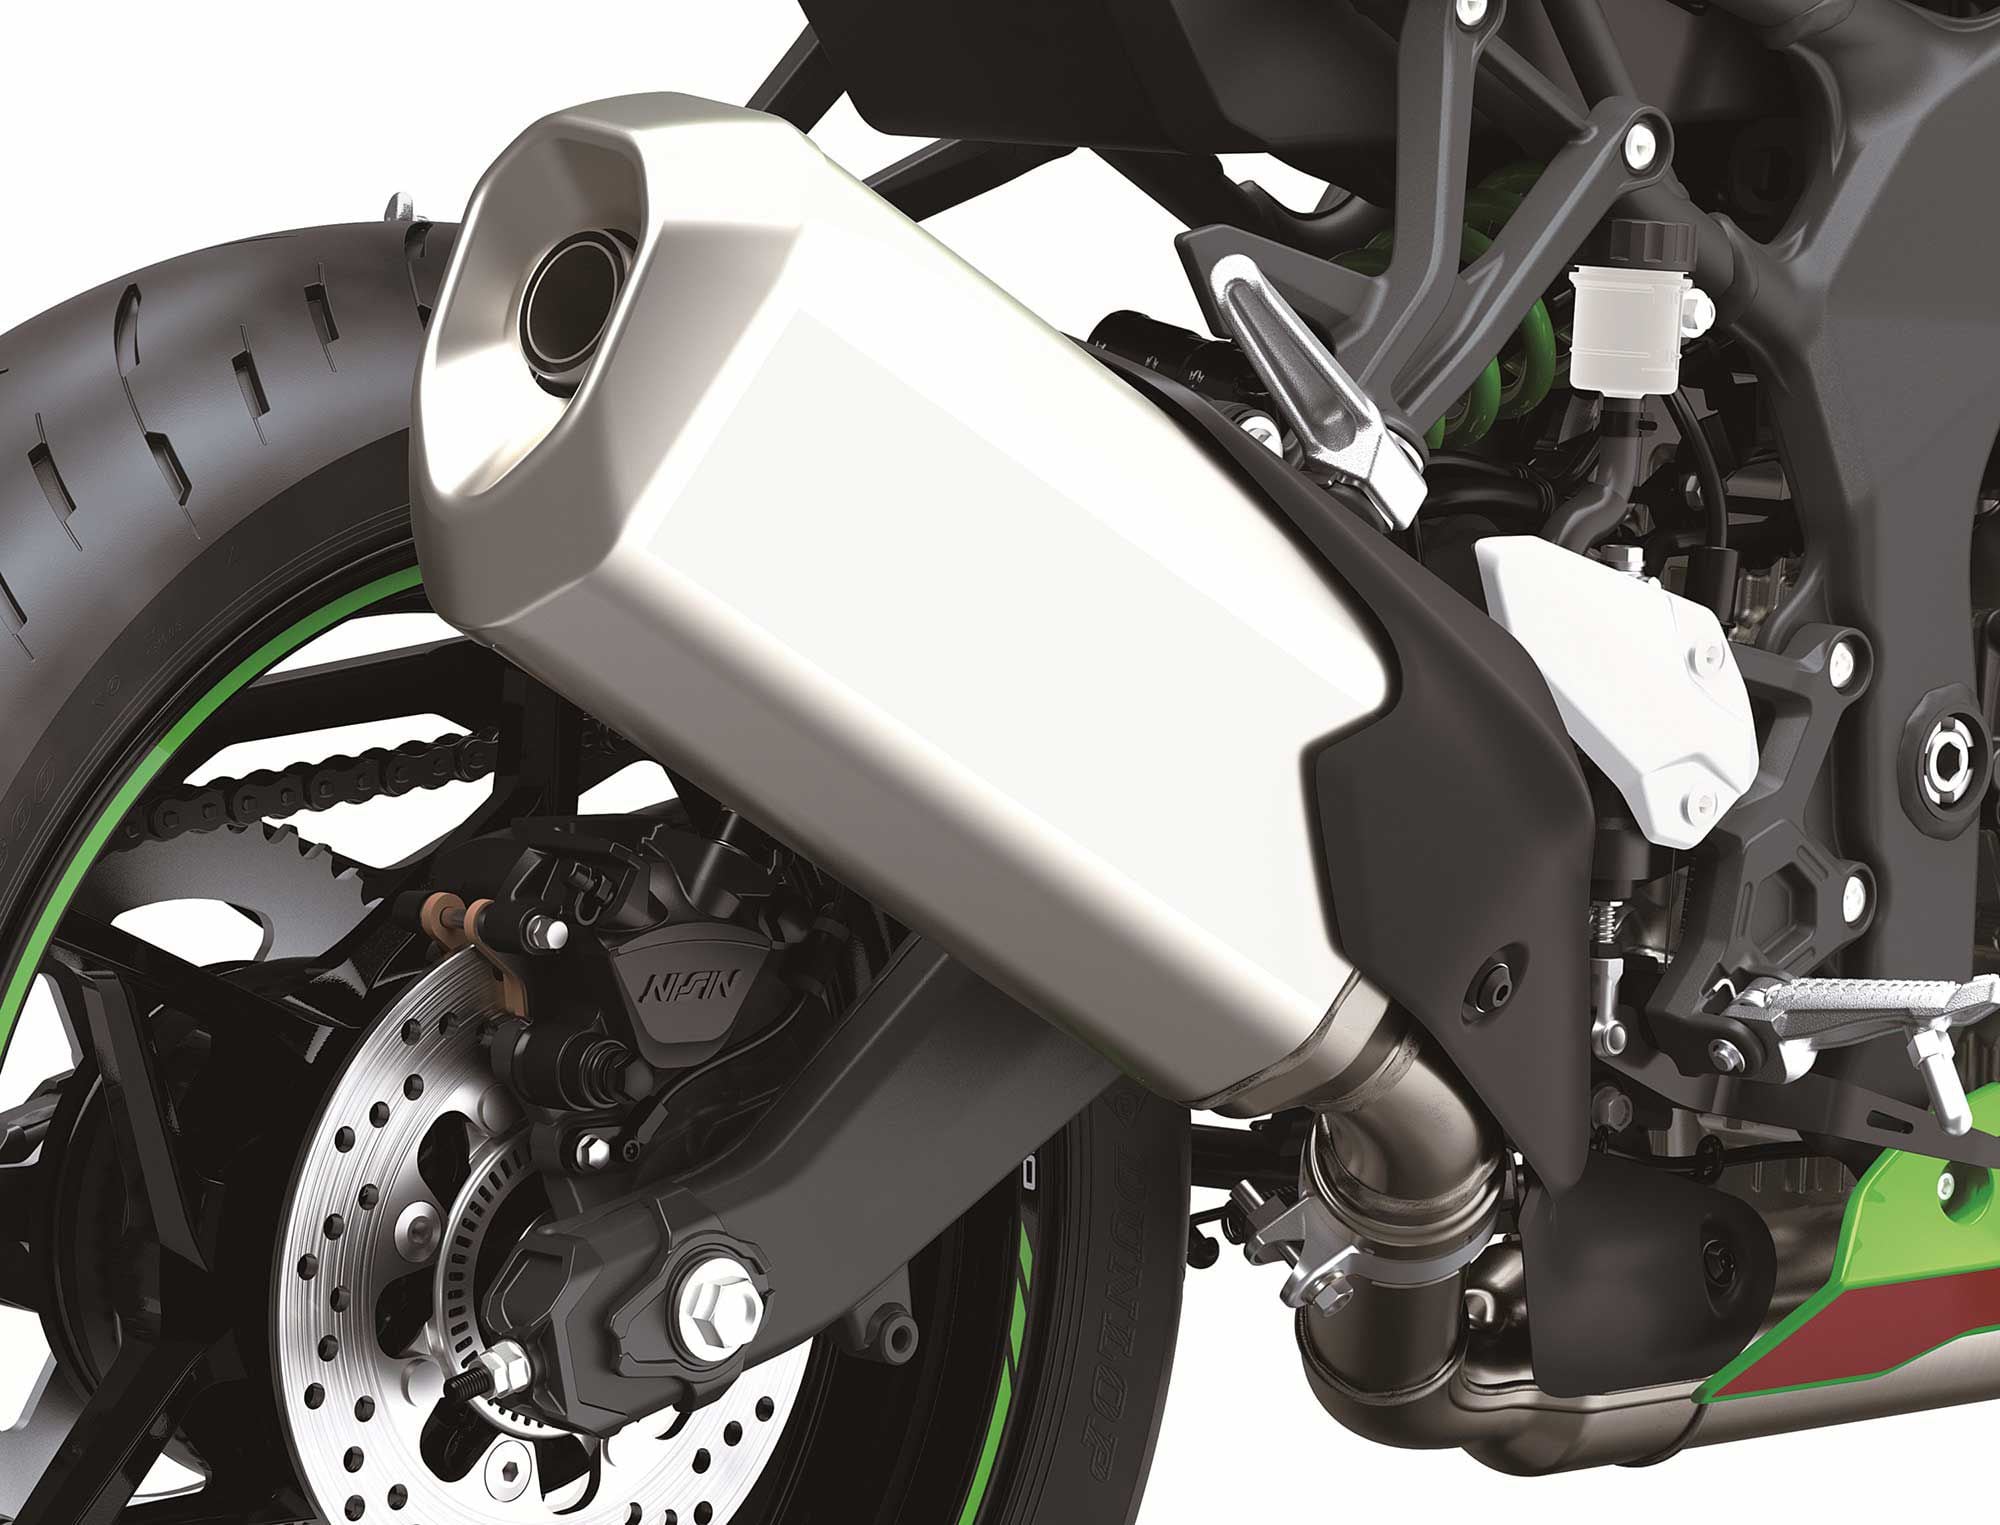 A long, traditional-style exhaust silencer is downstream from a trio of catalytic converters.